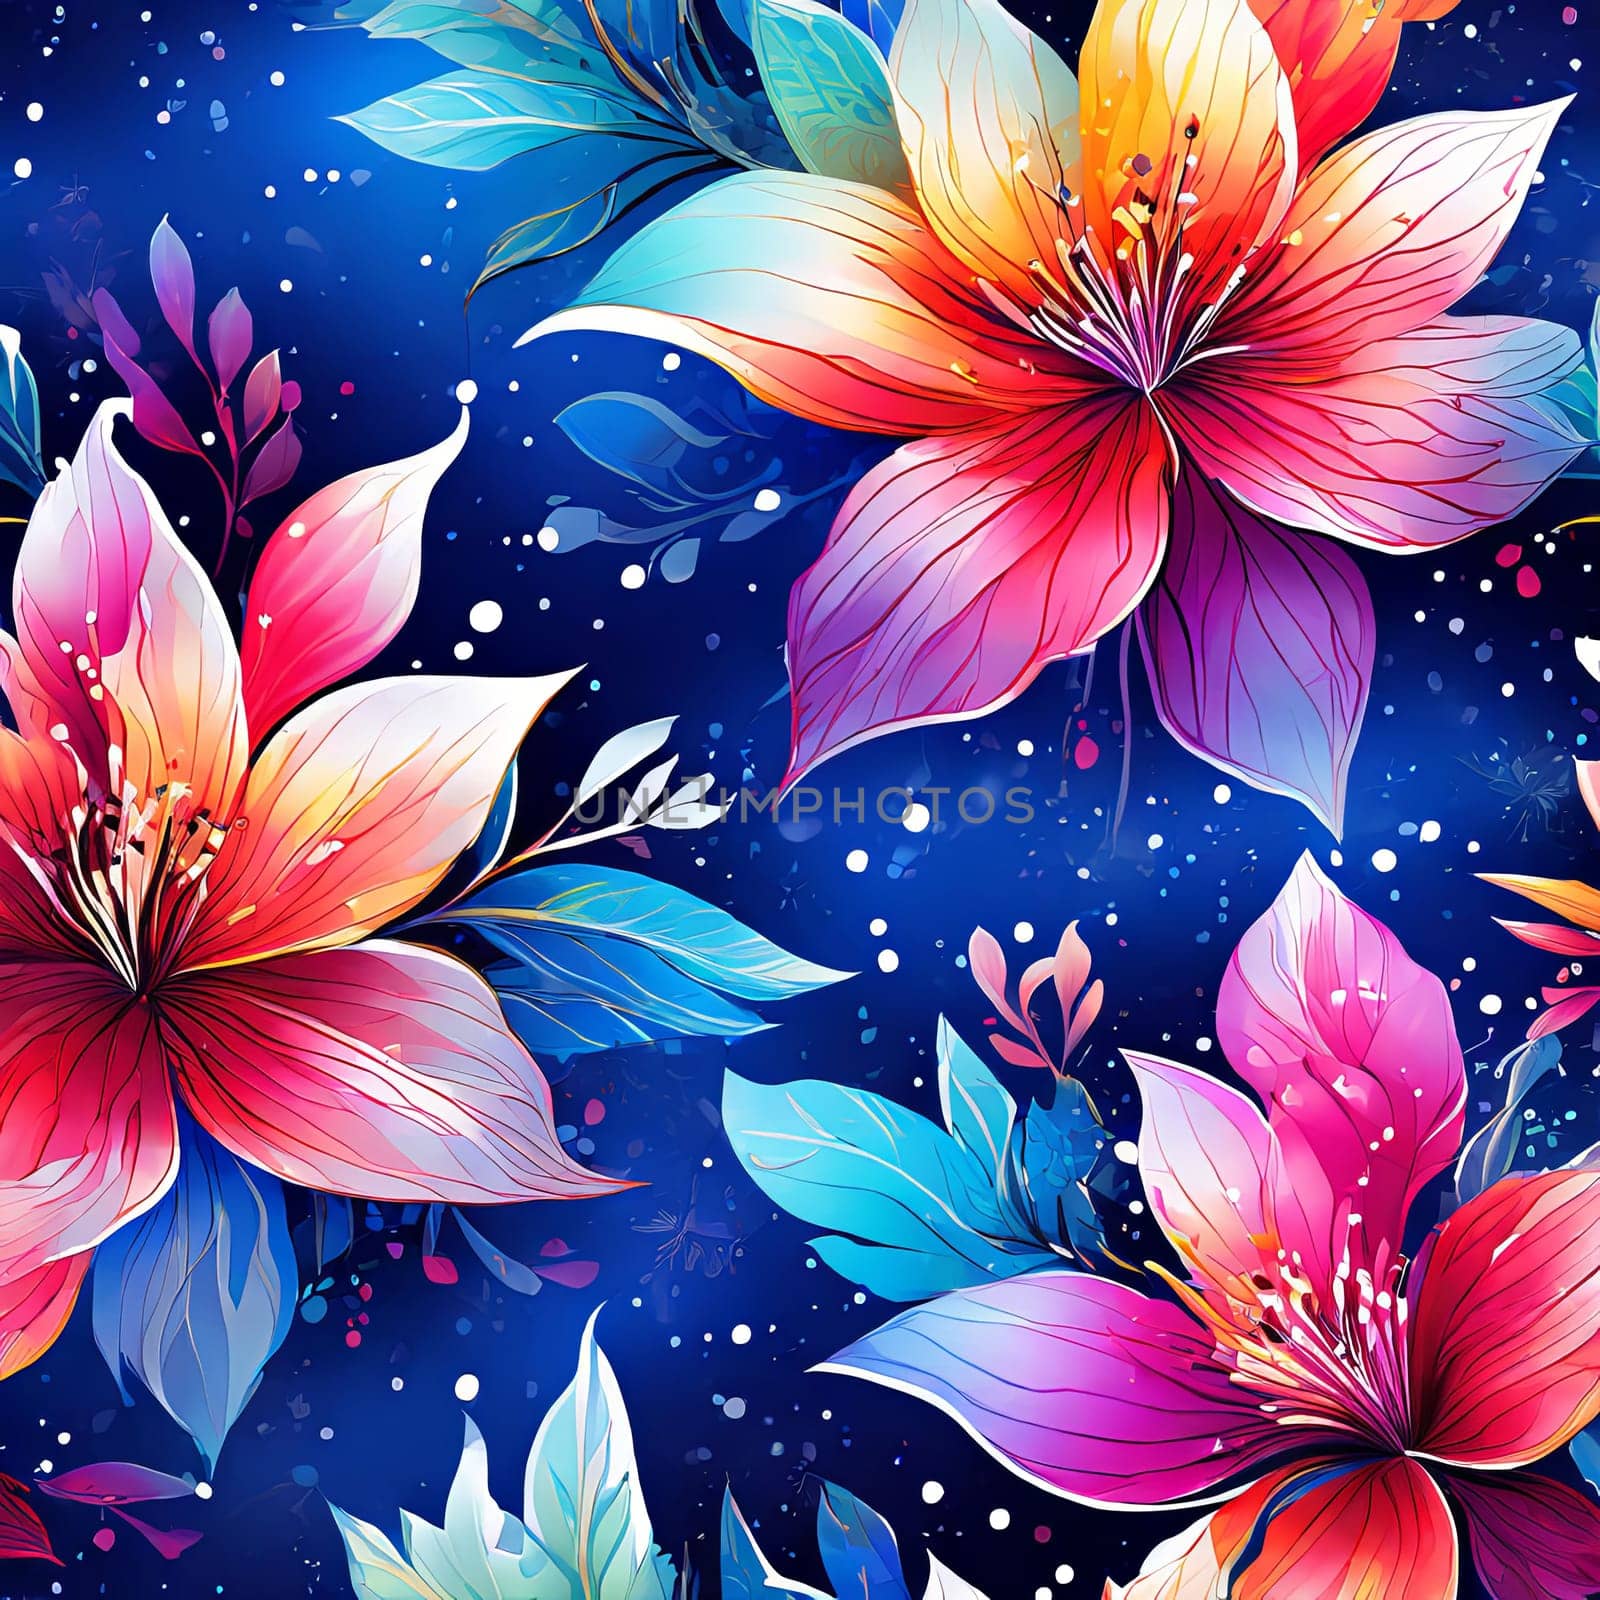 Vibrant, intricate floral design set against dark background, creating visually appealing contrast between colorful flowers, dark backdrop. For website design, advertising, greeting cards, magazines. by Angelsmoon